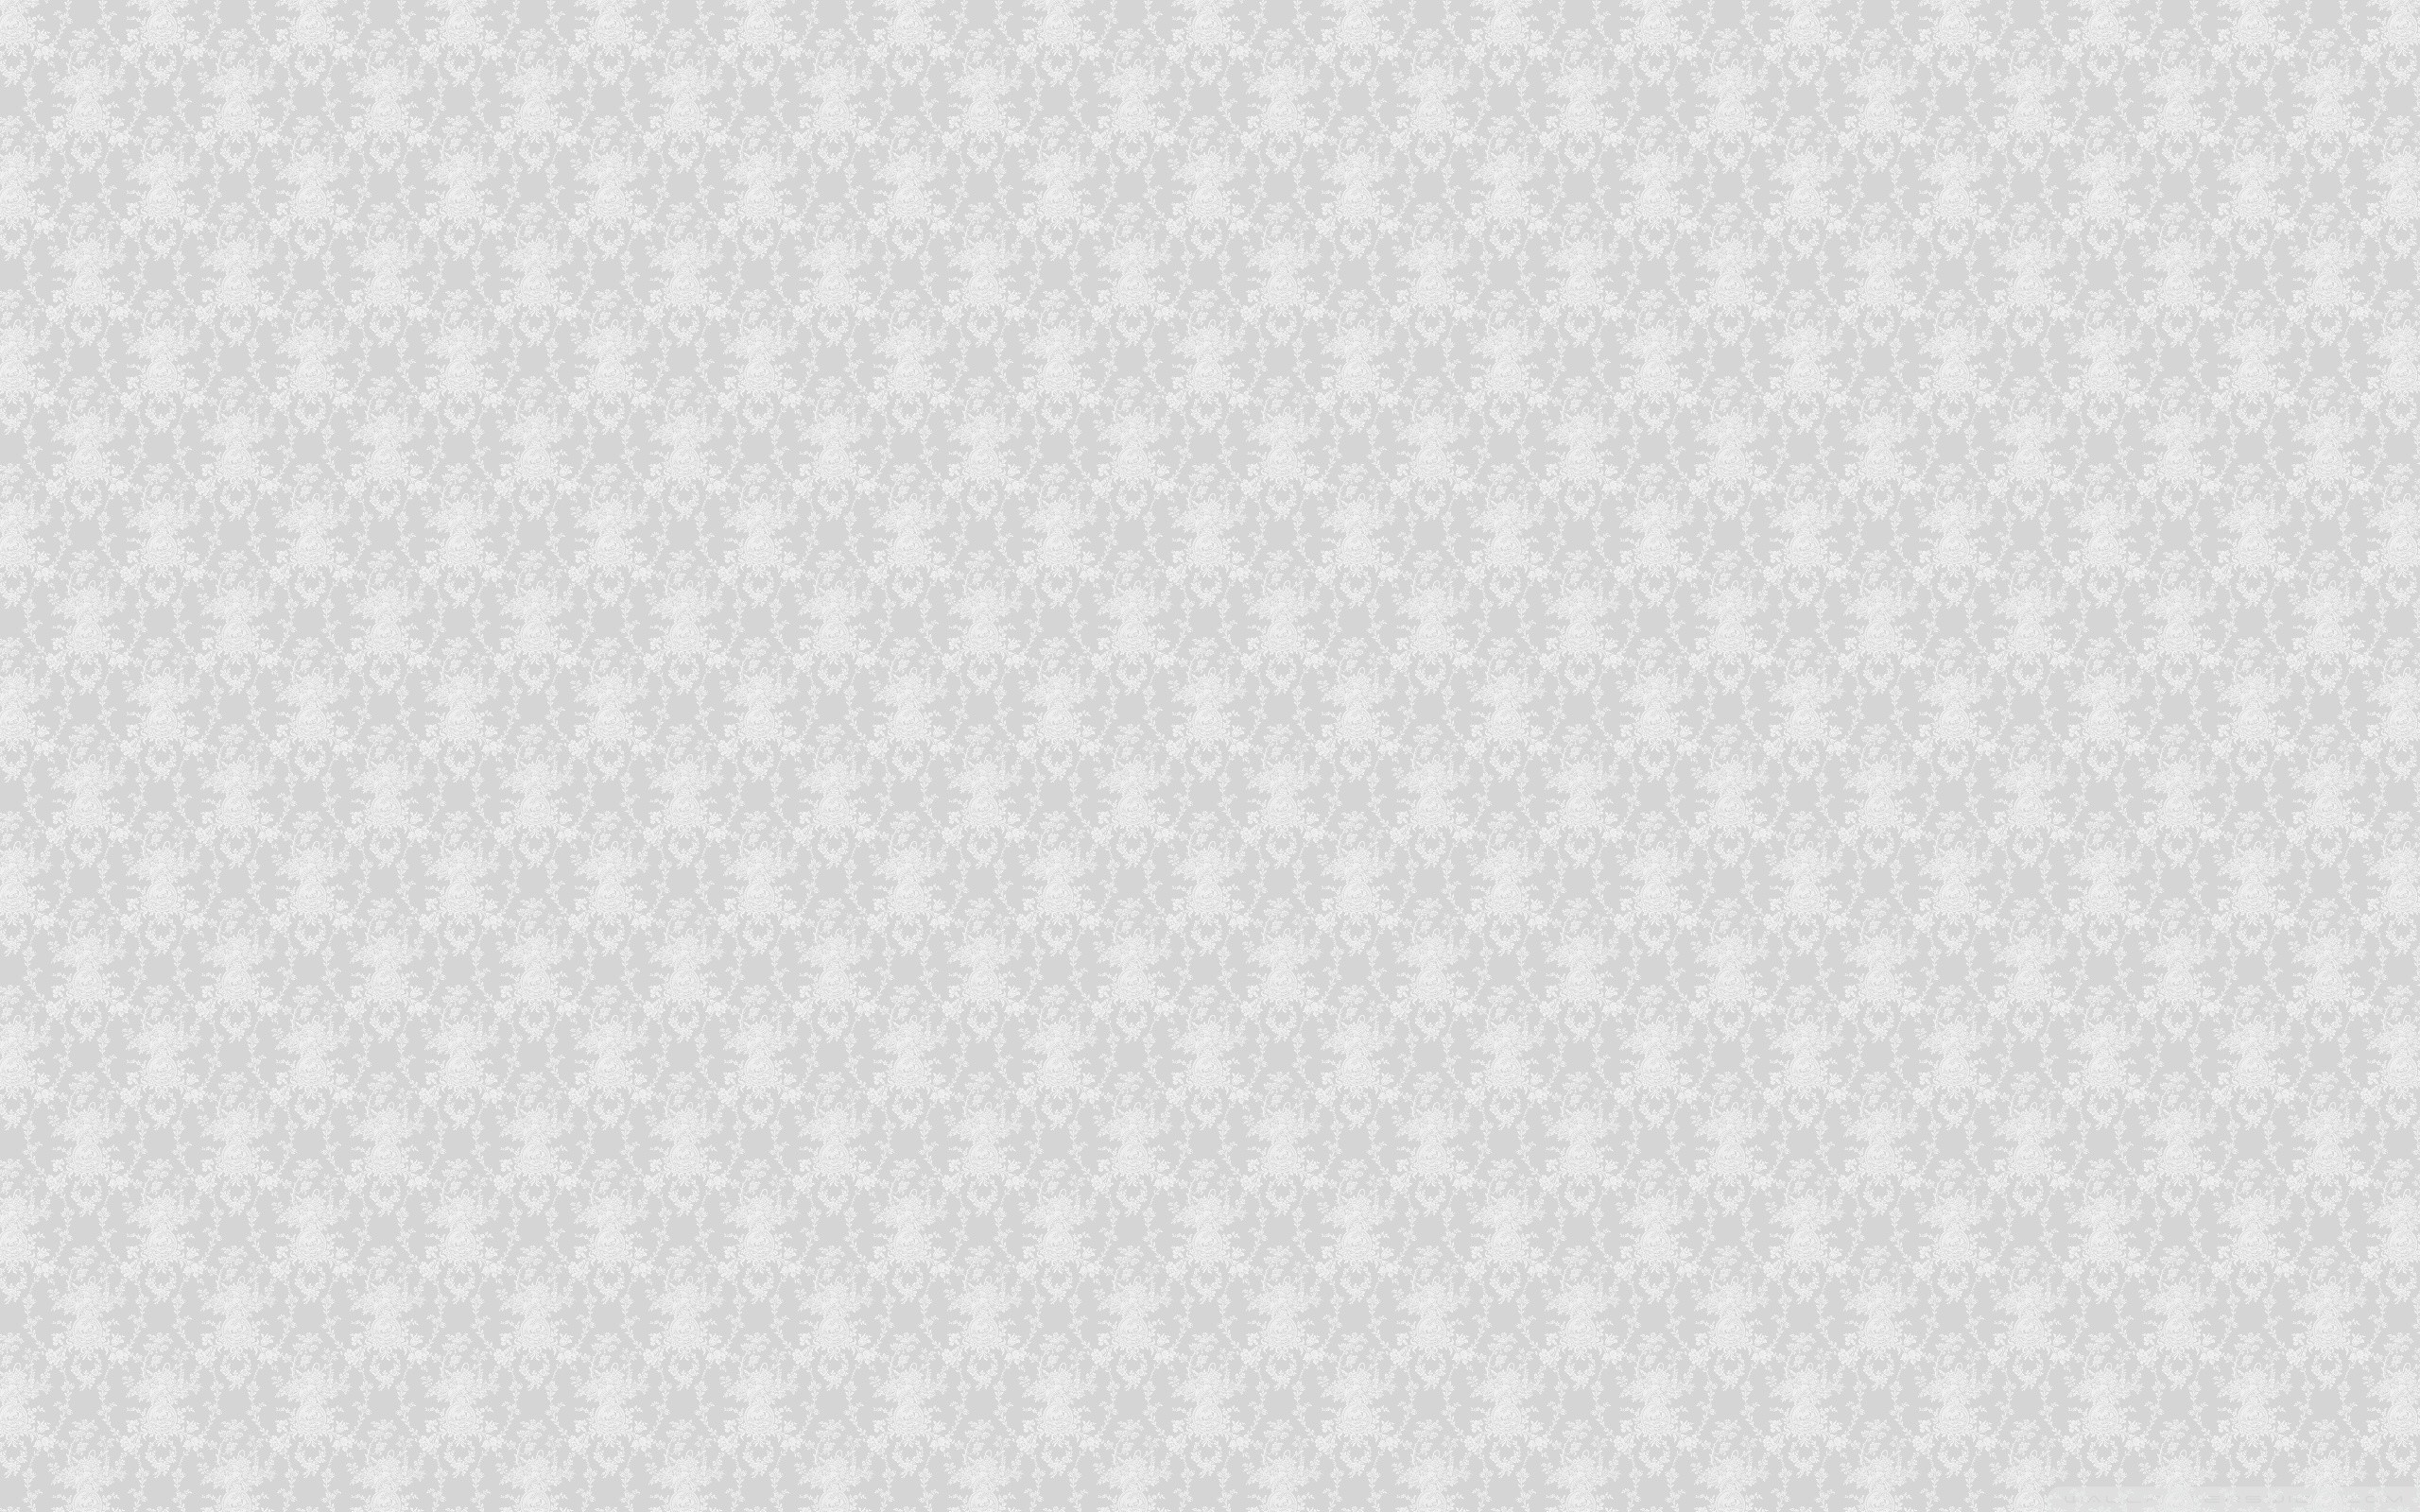 2560x1600 White Pattern Background Wallpaper for PowerPoint Presentations